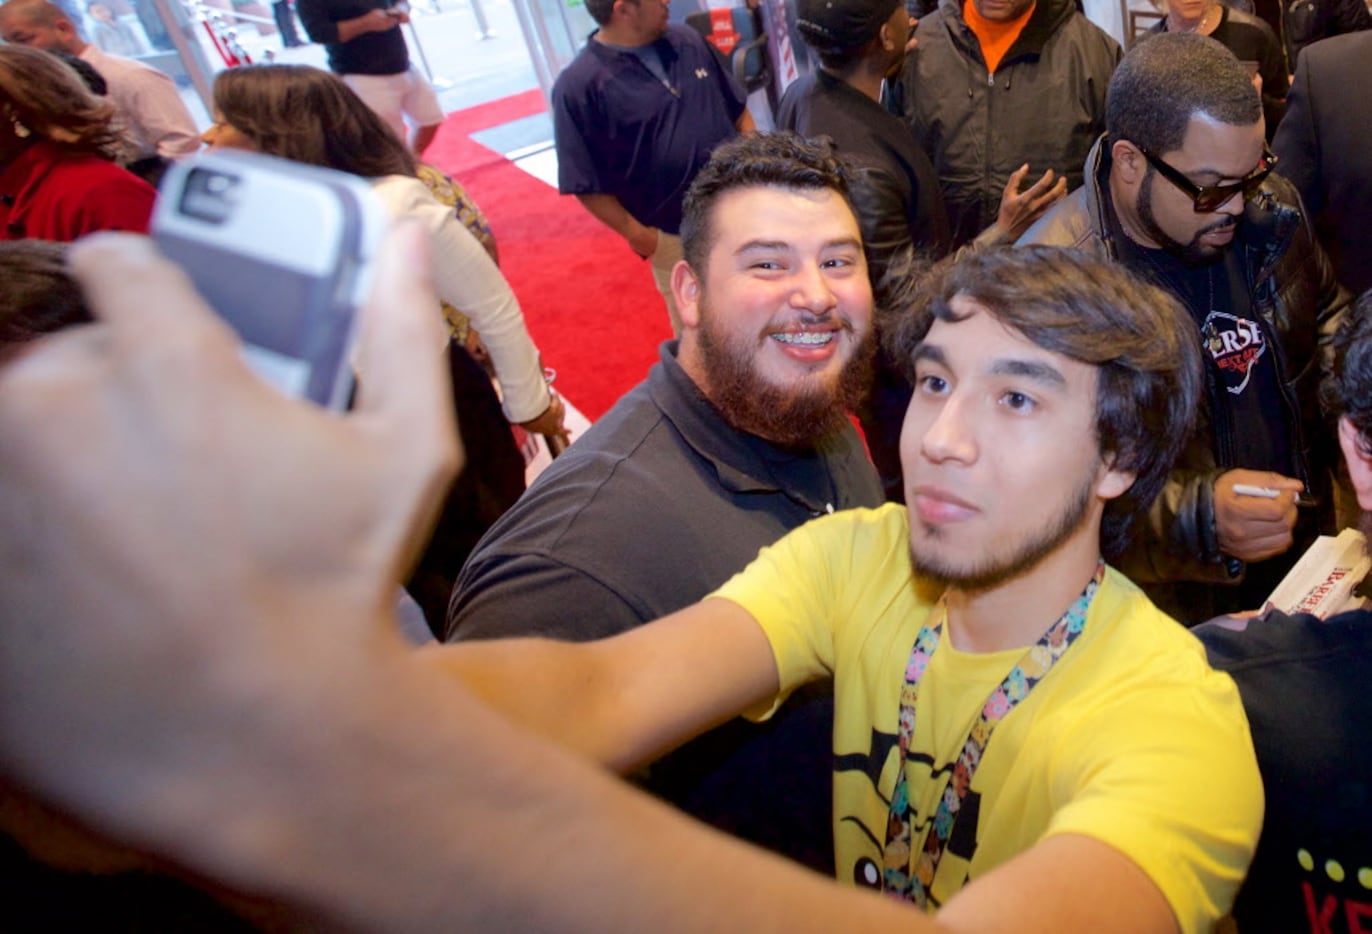 Irving Marroquin, right, and Daniel Rocha, left, pose for a selfie with O'Shea Jackson,...